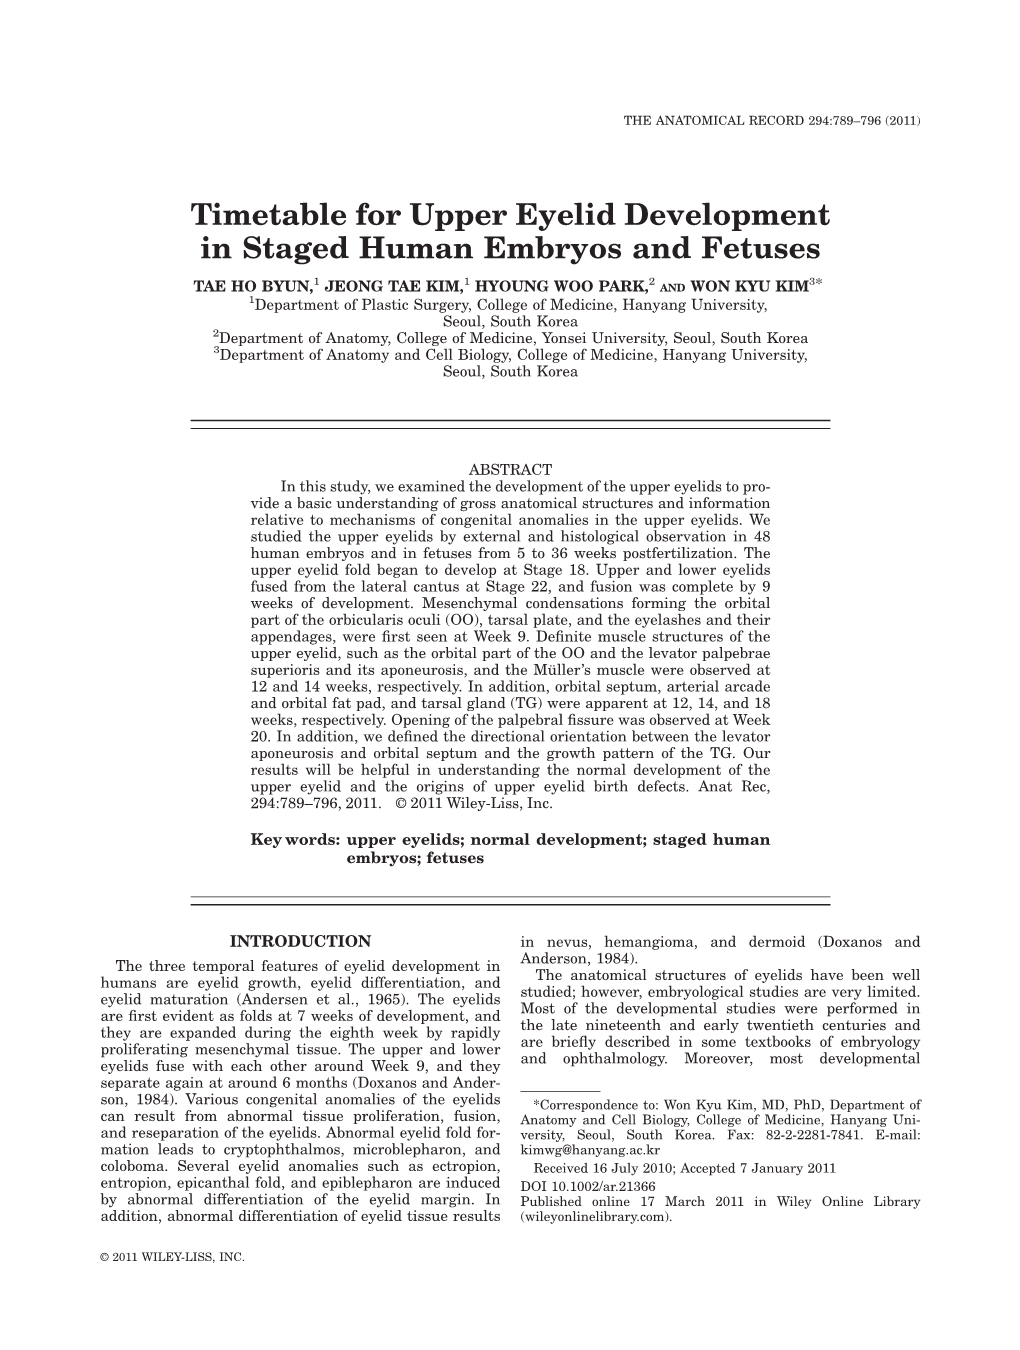 Timetable for Upper Eyelid Development in Staged Human Embryos and Fetuses